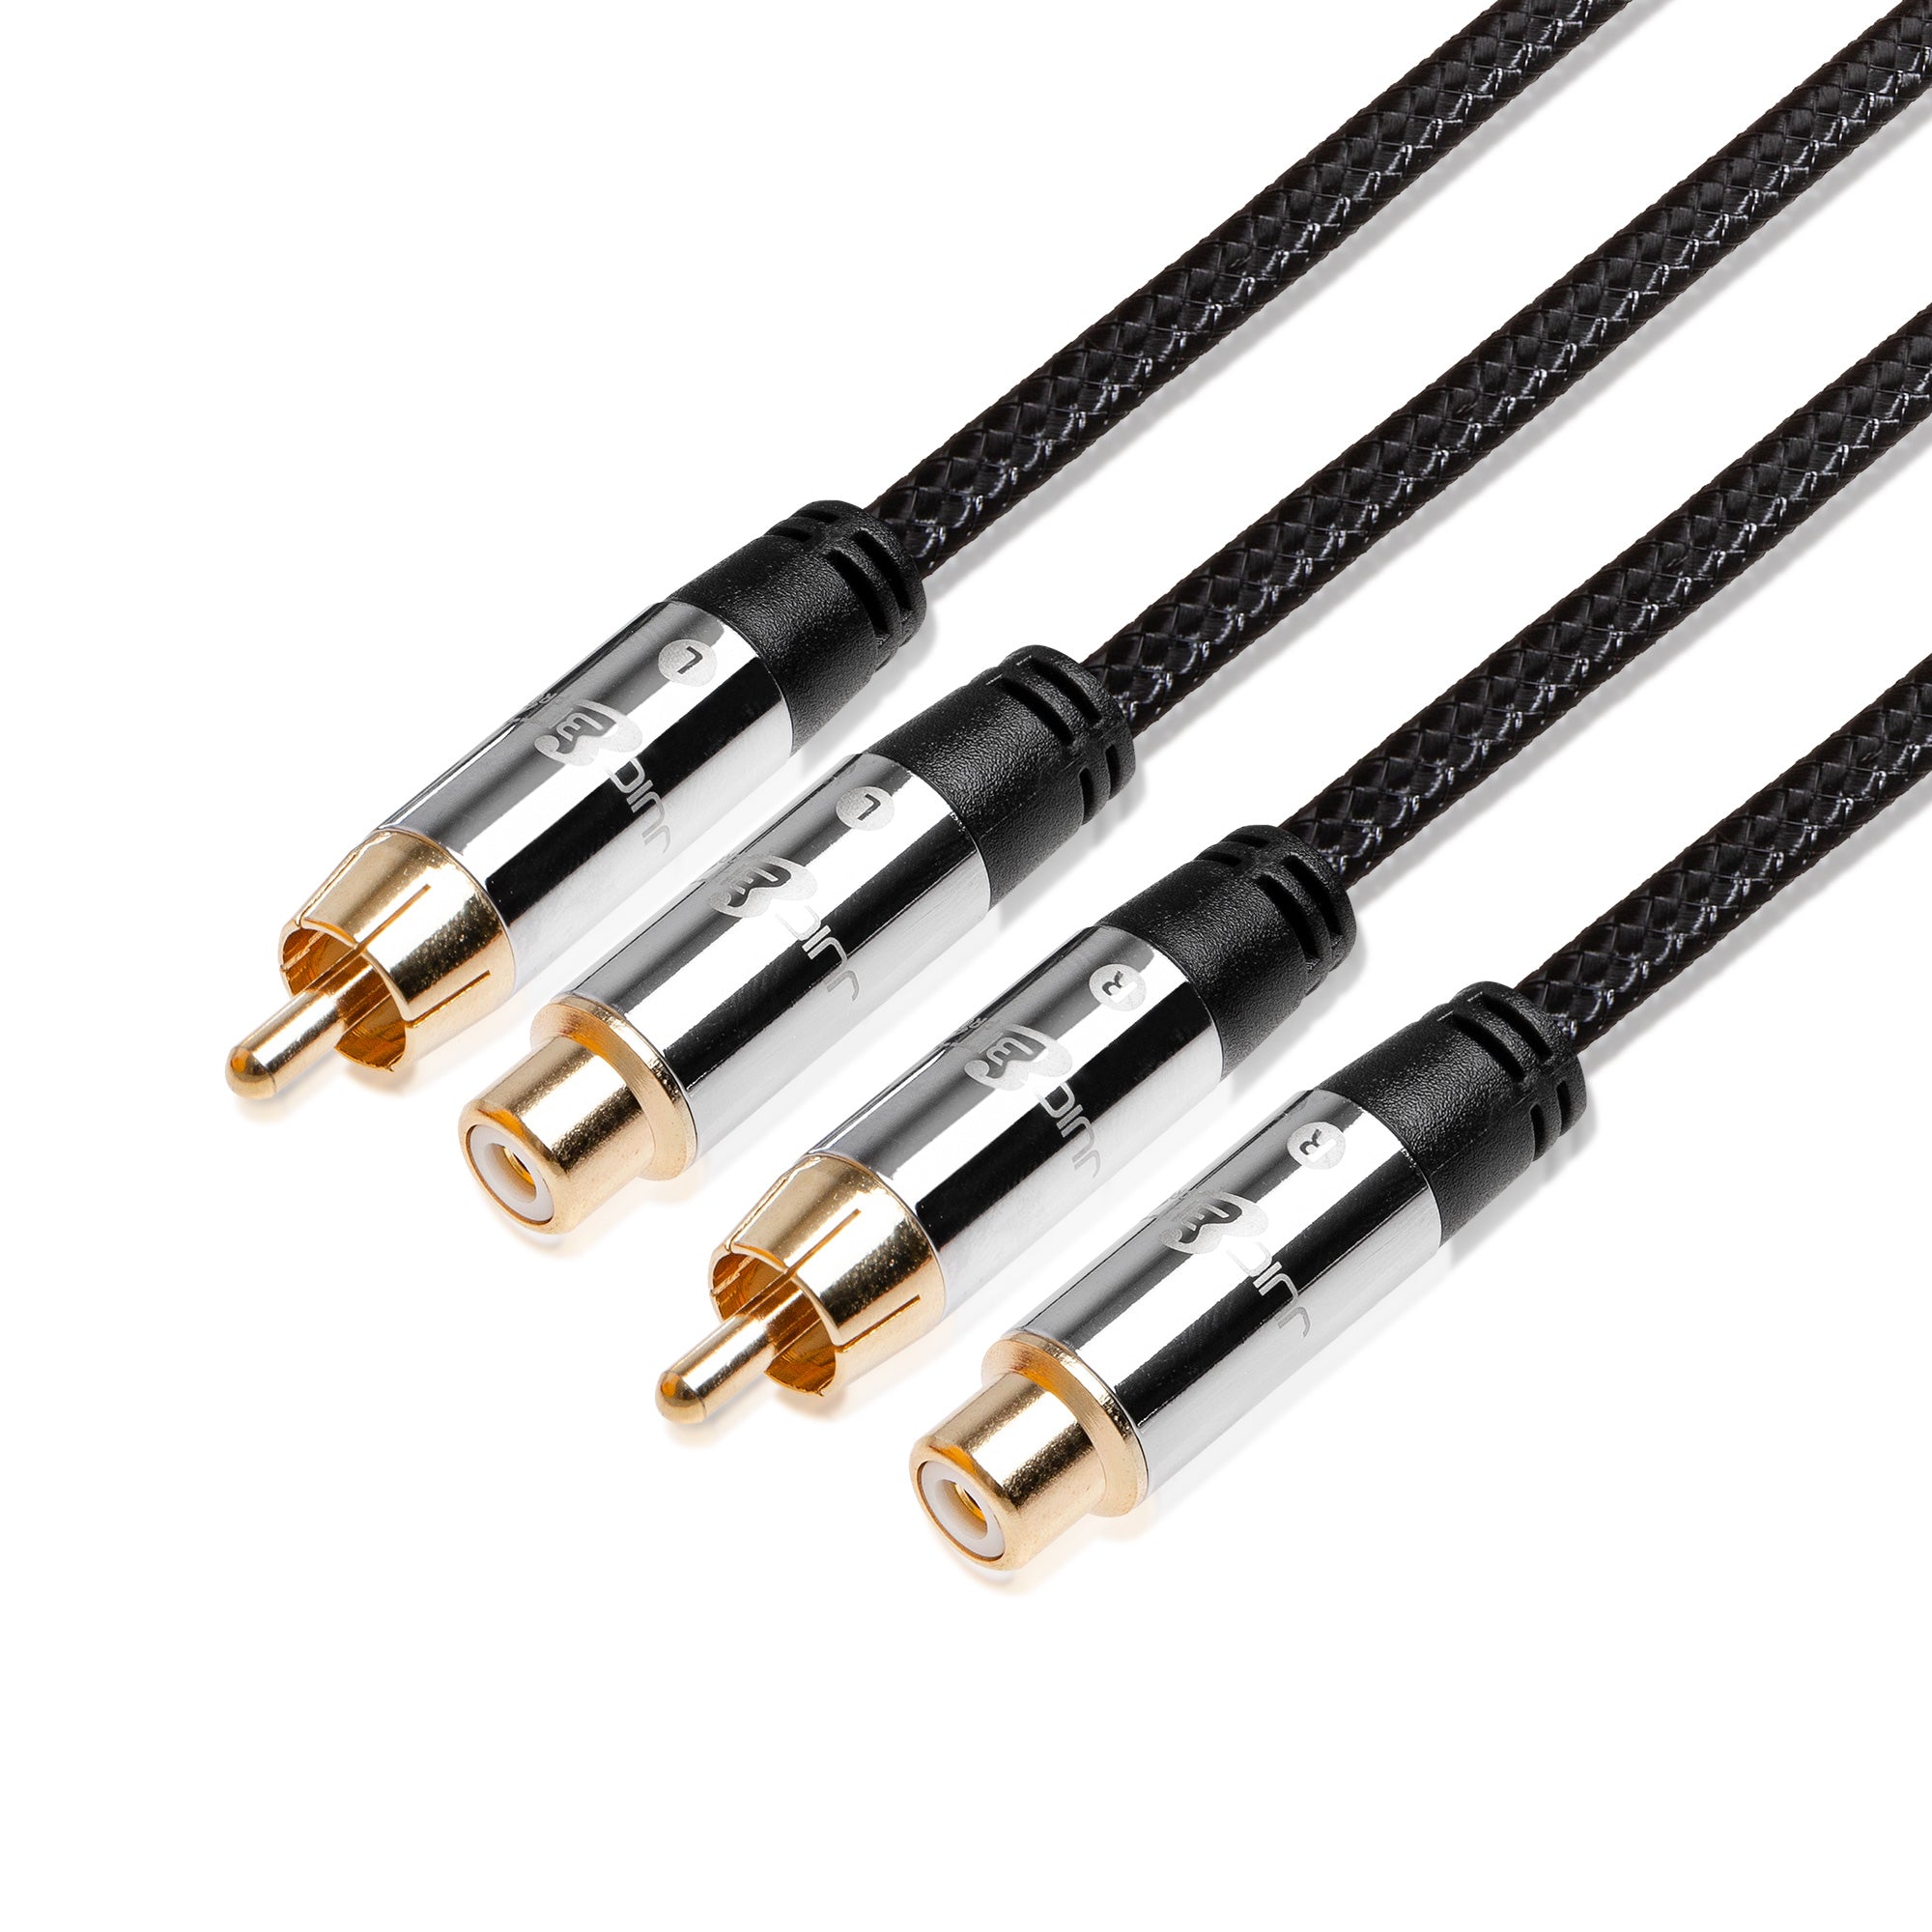 PRO Series Braided RCA Male to Female Phono Stereo Audio Component Cable - Pair